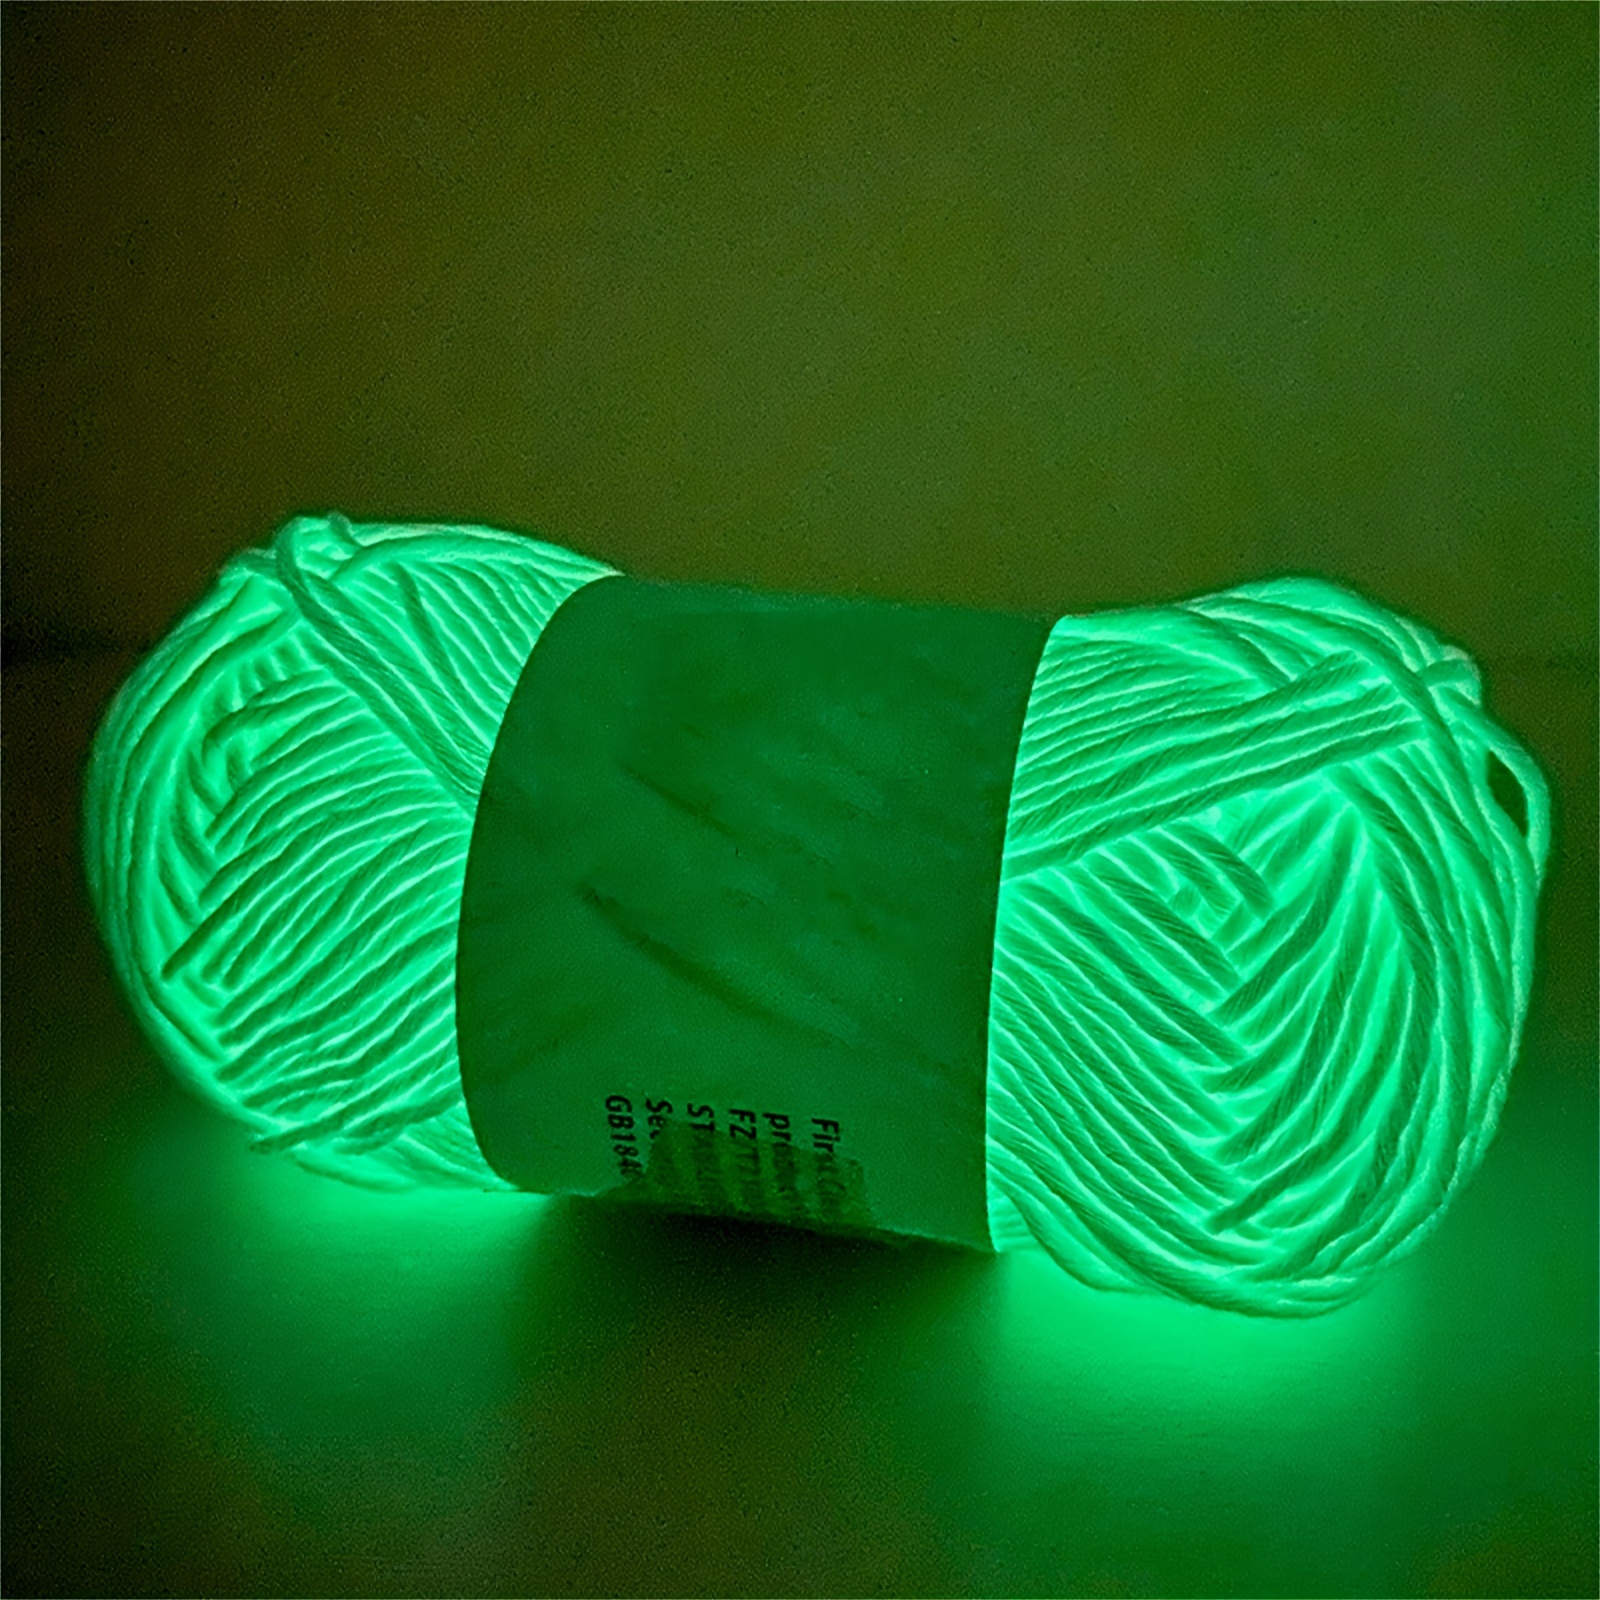 1Pc Glow in The Dark Yarn for Crochet - Fluorescent Luminous Thread  Knitting Glowing Yarn for Crocheting - Sewing Supplies for Knitting DIY  Crafts 